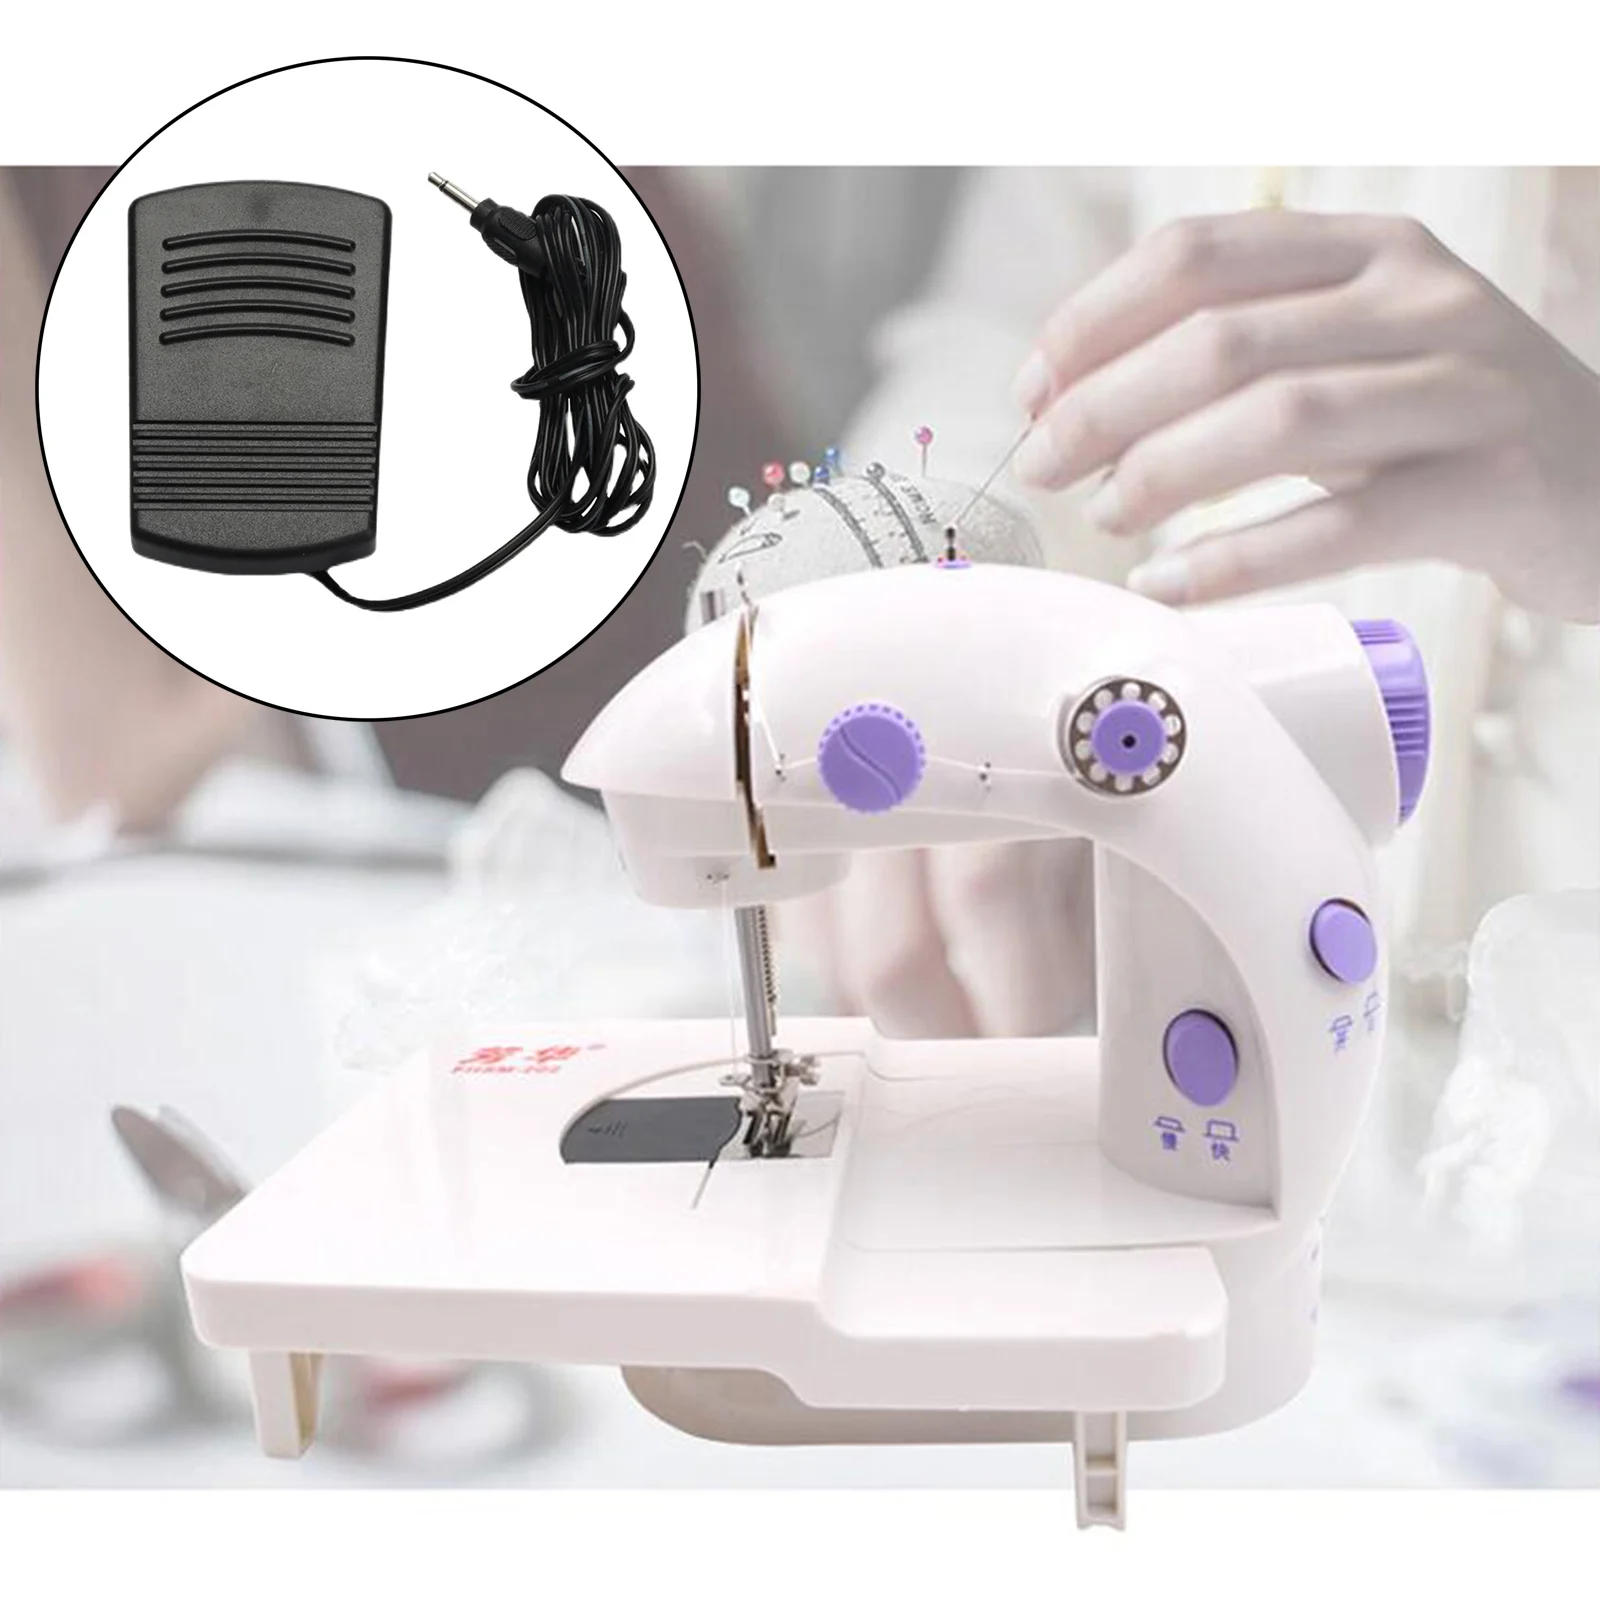 Sewing Machine Pedal Foot Control Pedal Household Sewing Machine Sewing Machine Foot Control Pedal With Cord